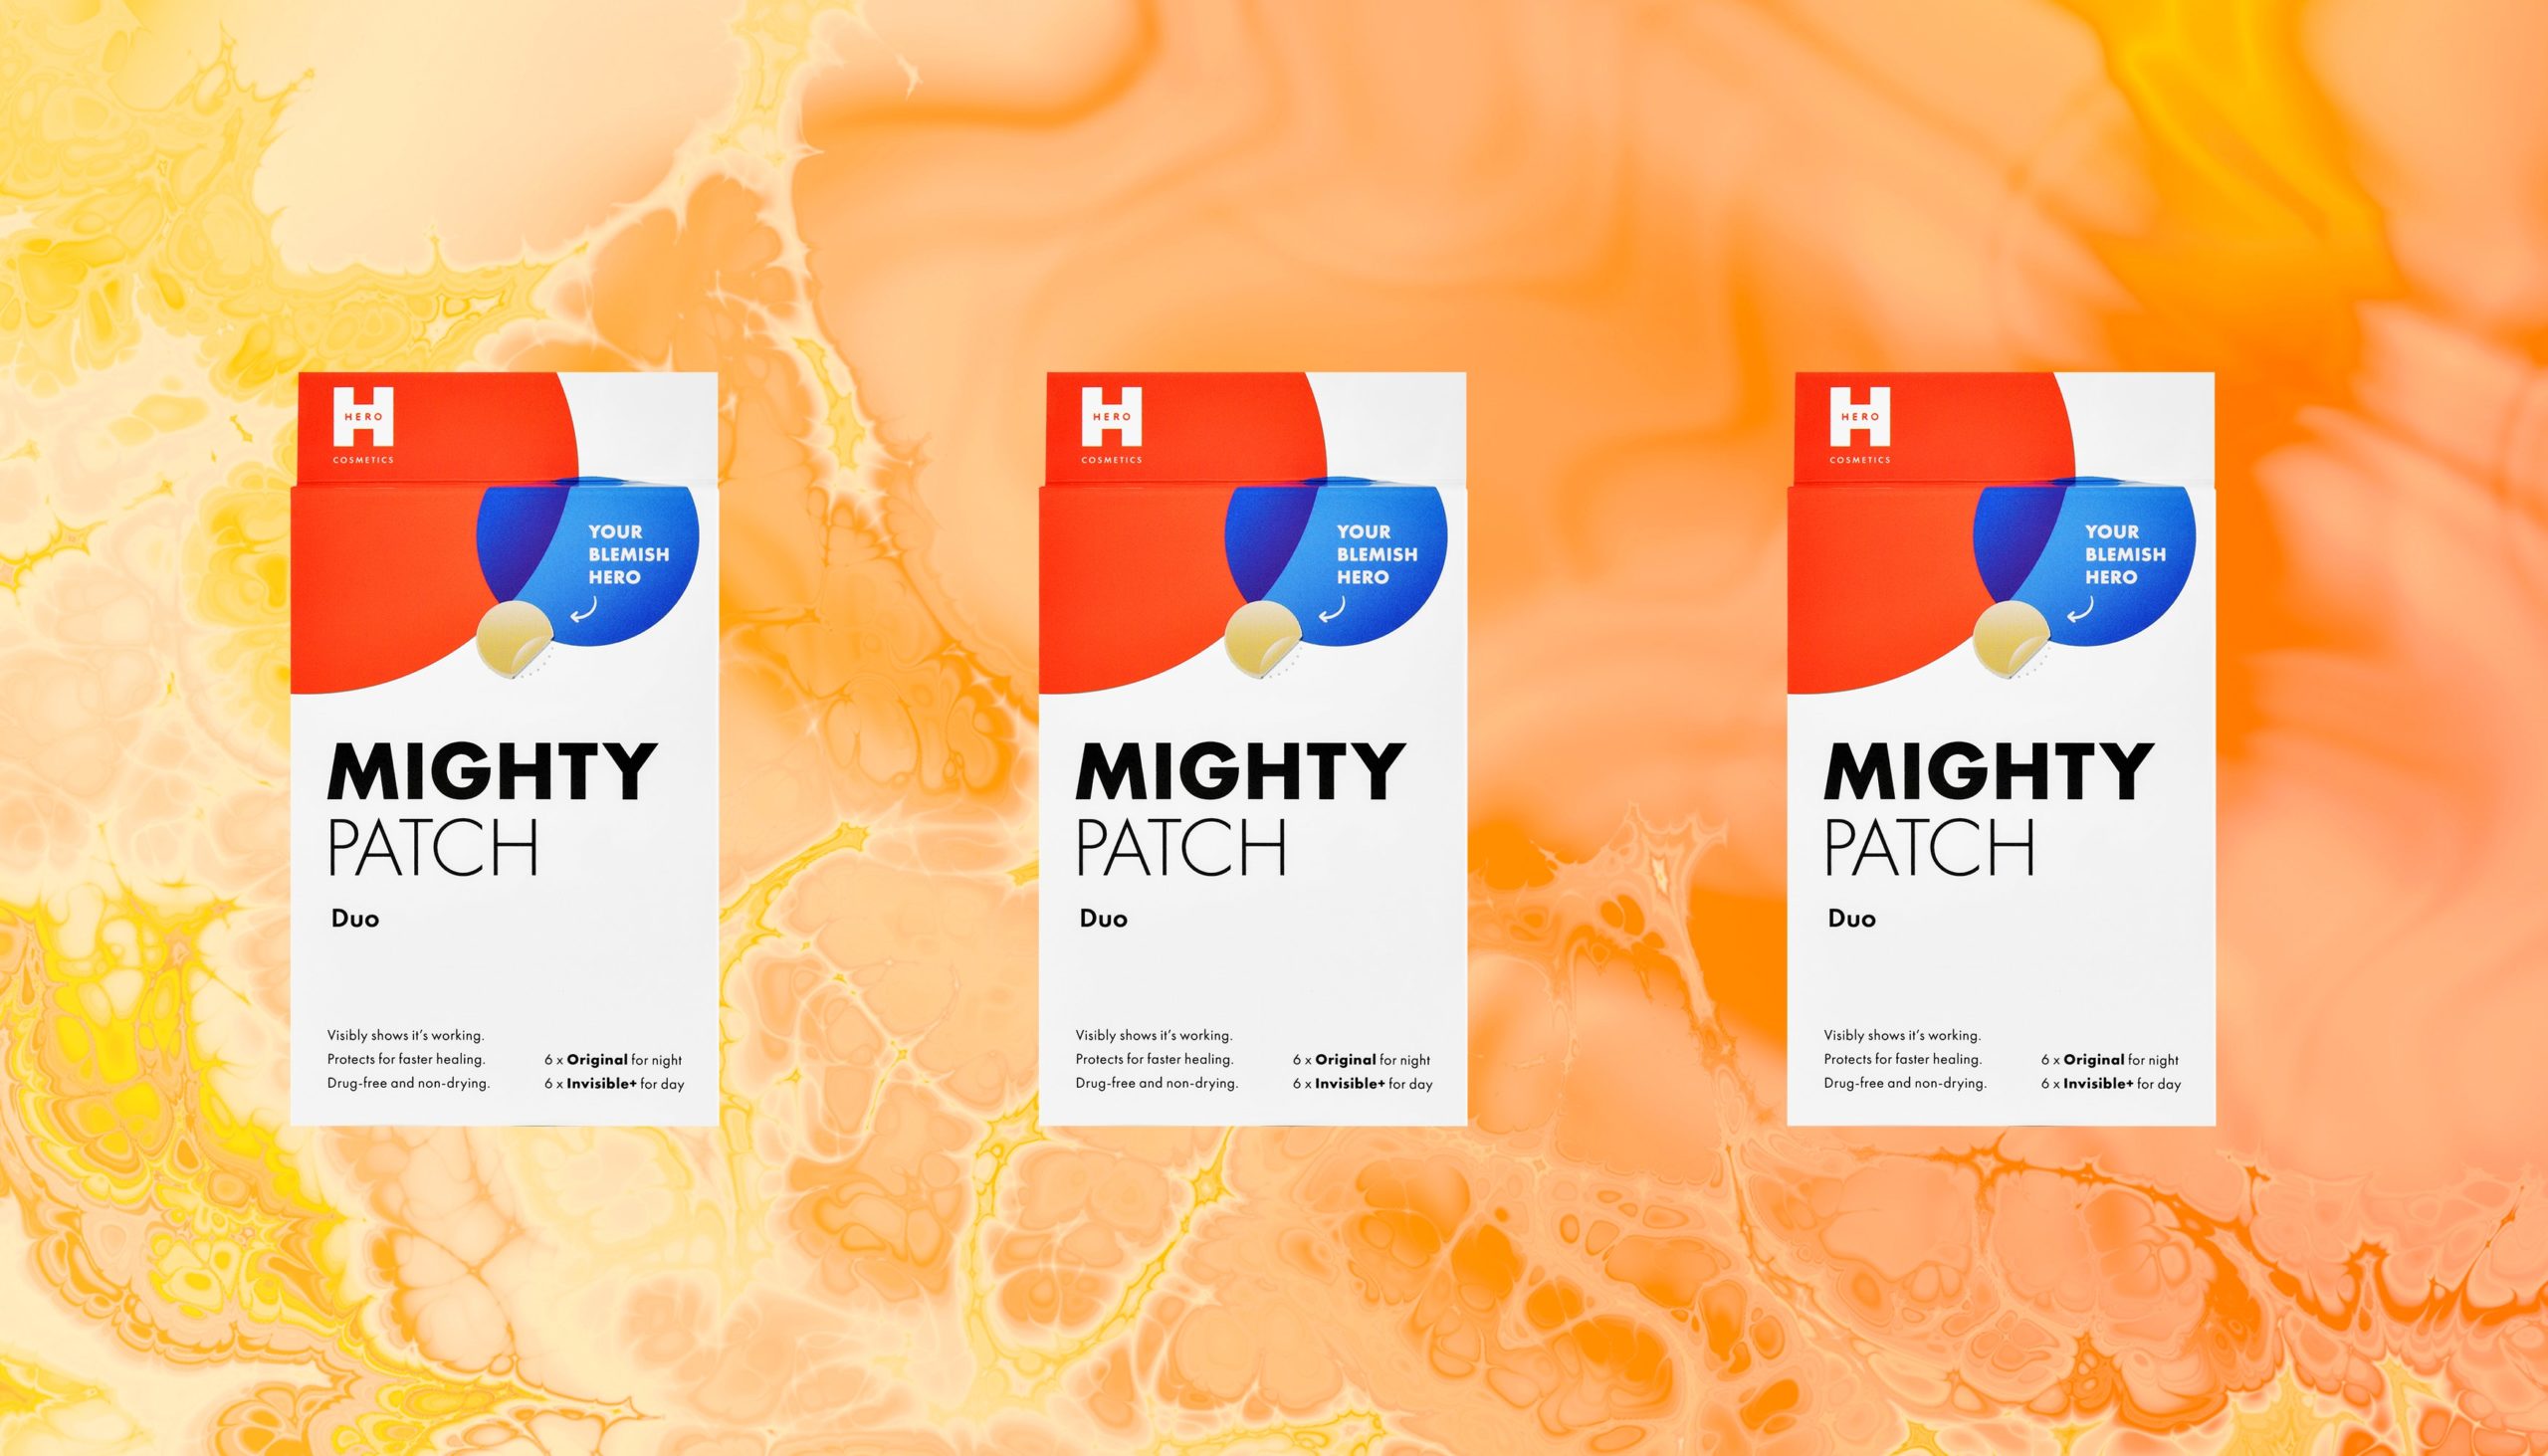 Hero Cosmetics Mighty Patch Duo’s Pimple Stickers Shrink My Breakouts on the Sly